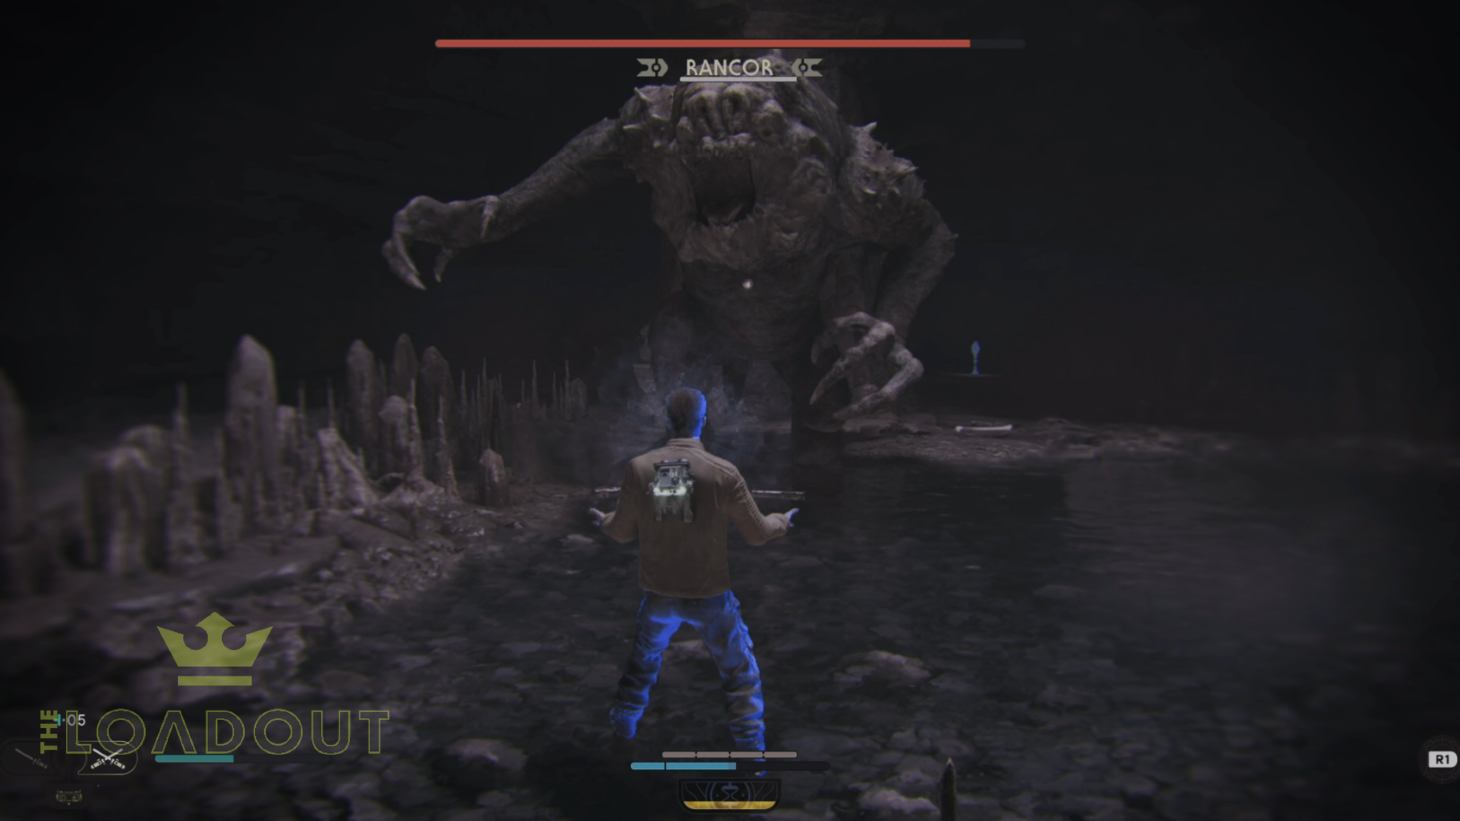 Star Wars Jedi Survivor Rancor Fight: Cal can be seen using the automatic parry